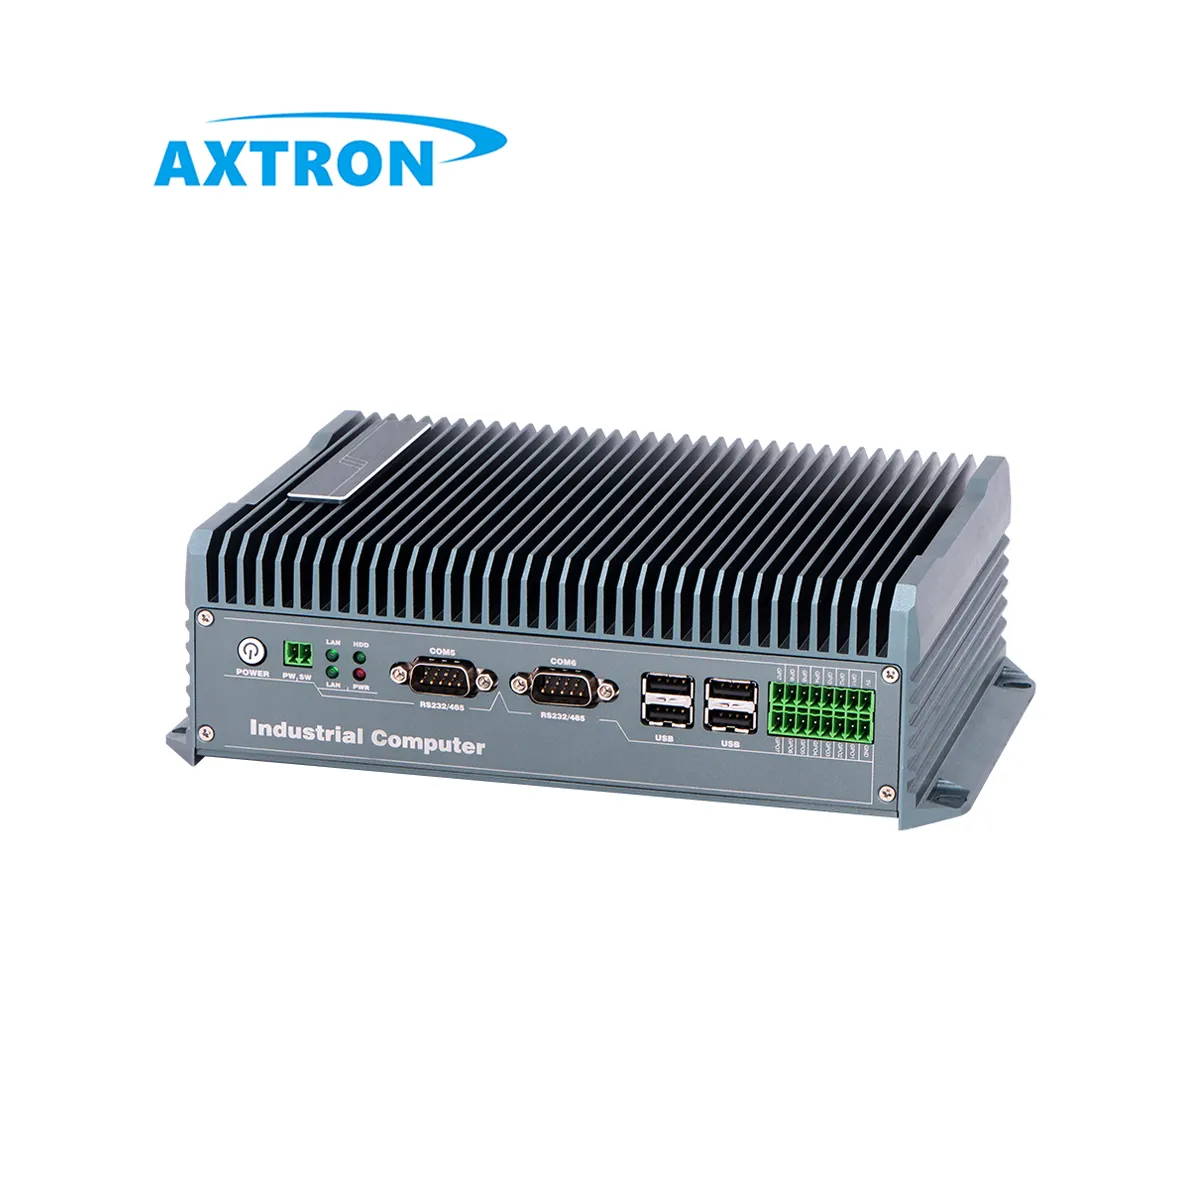 2 ethernet 8 USB 6 COM RS232 RS485 linux window i3 i5 i7 Compact rich l0 fanless embedded computer industrial mini pc